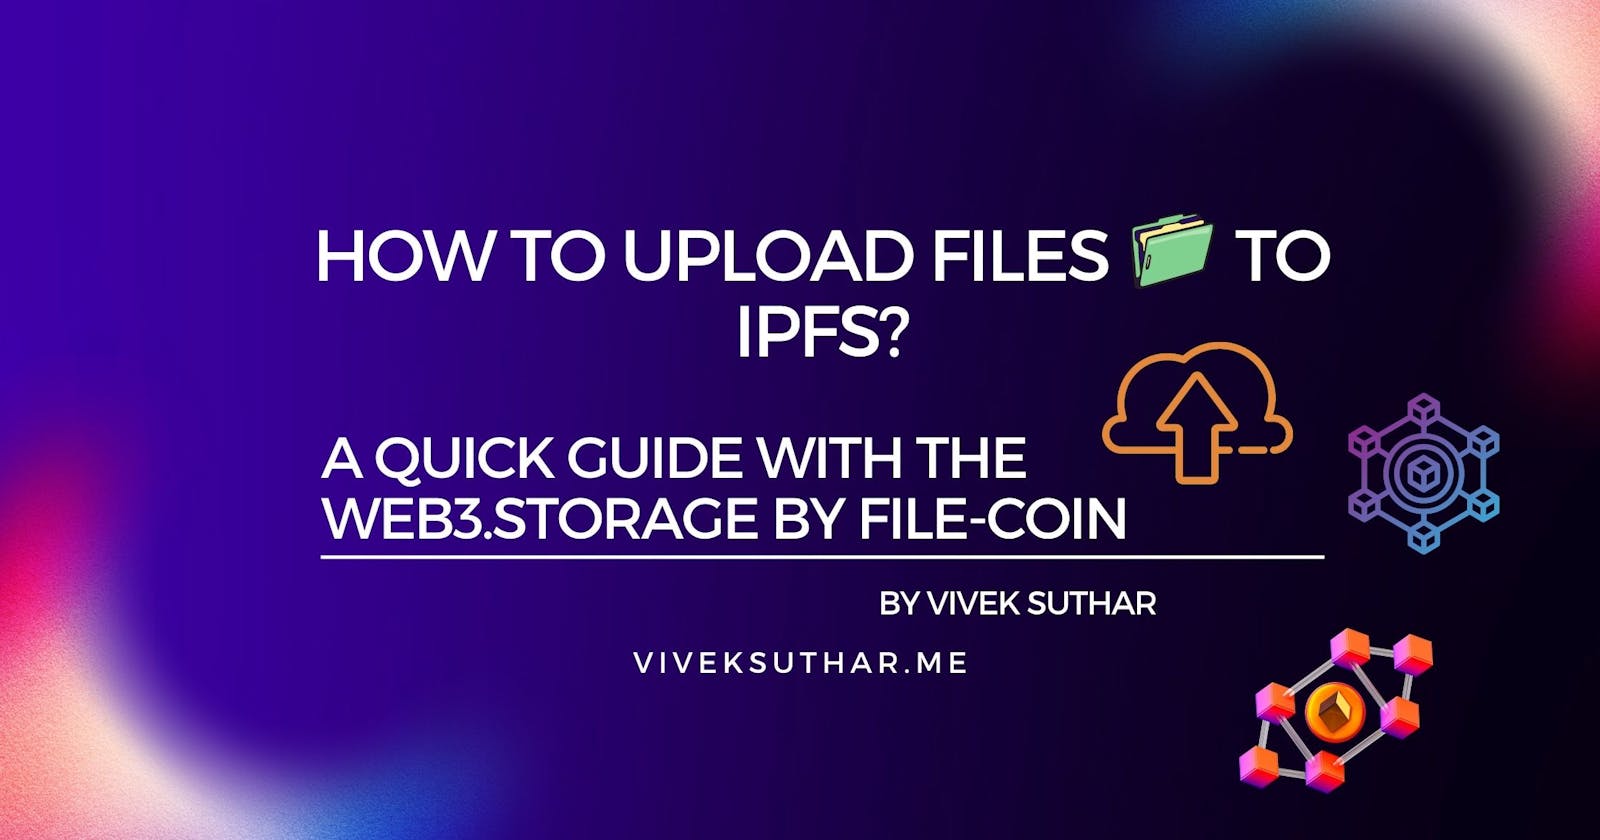 Upload your Files to IPFS: An Easy guide